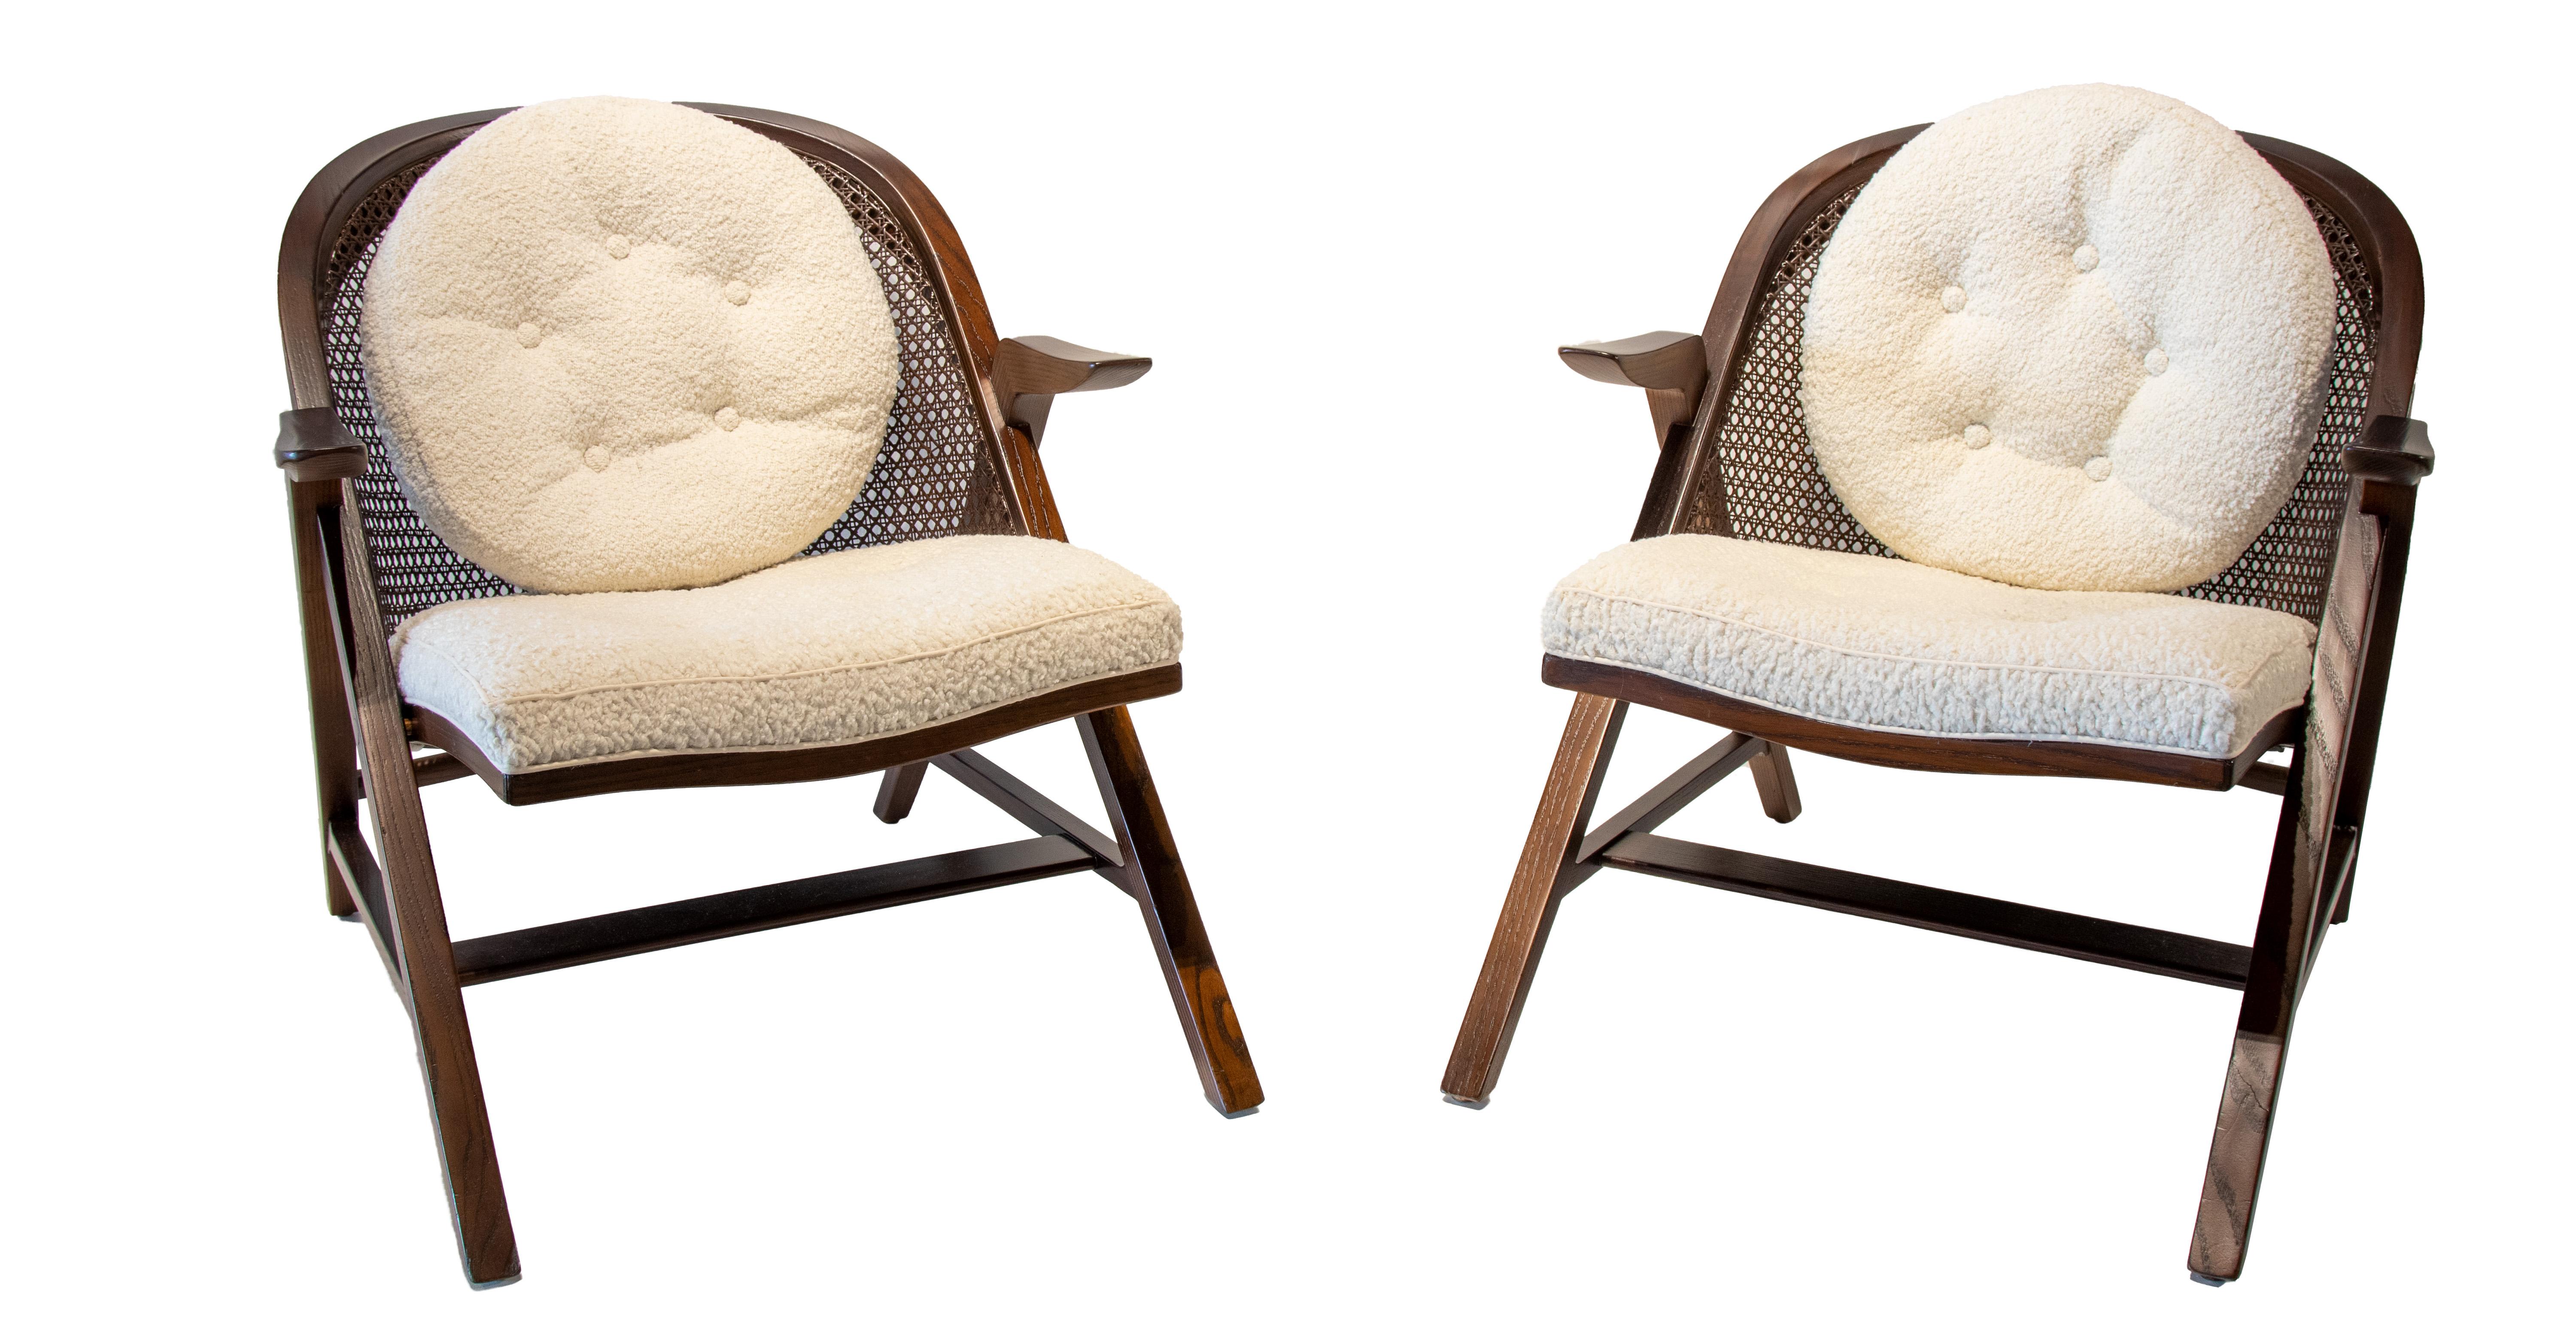 Mid-20th Century Pair of 1950s Edward Wormley for Dunbar Cane back Chairs model 5700a For Sale